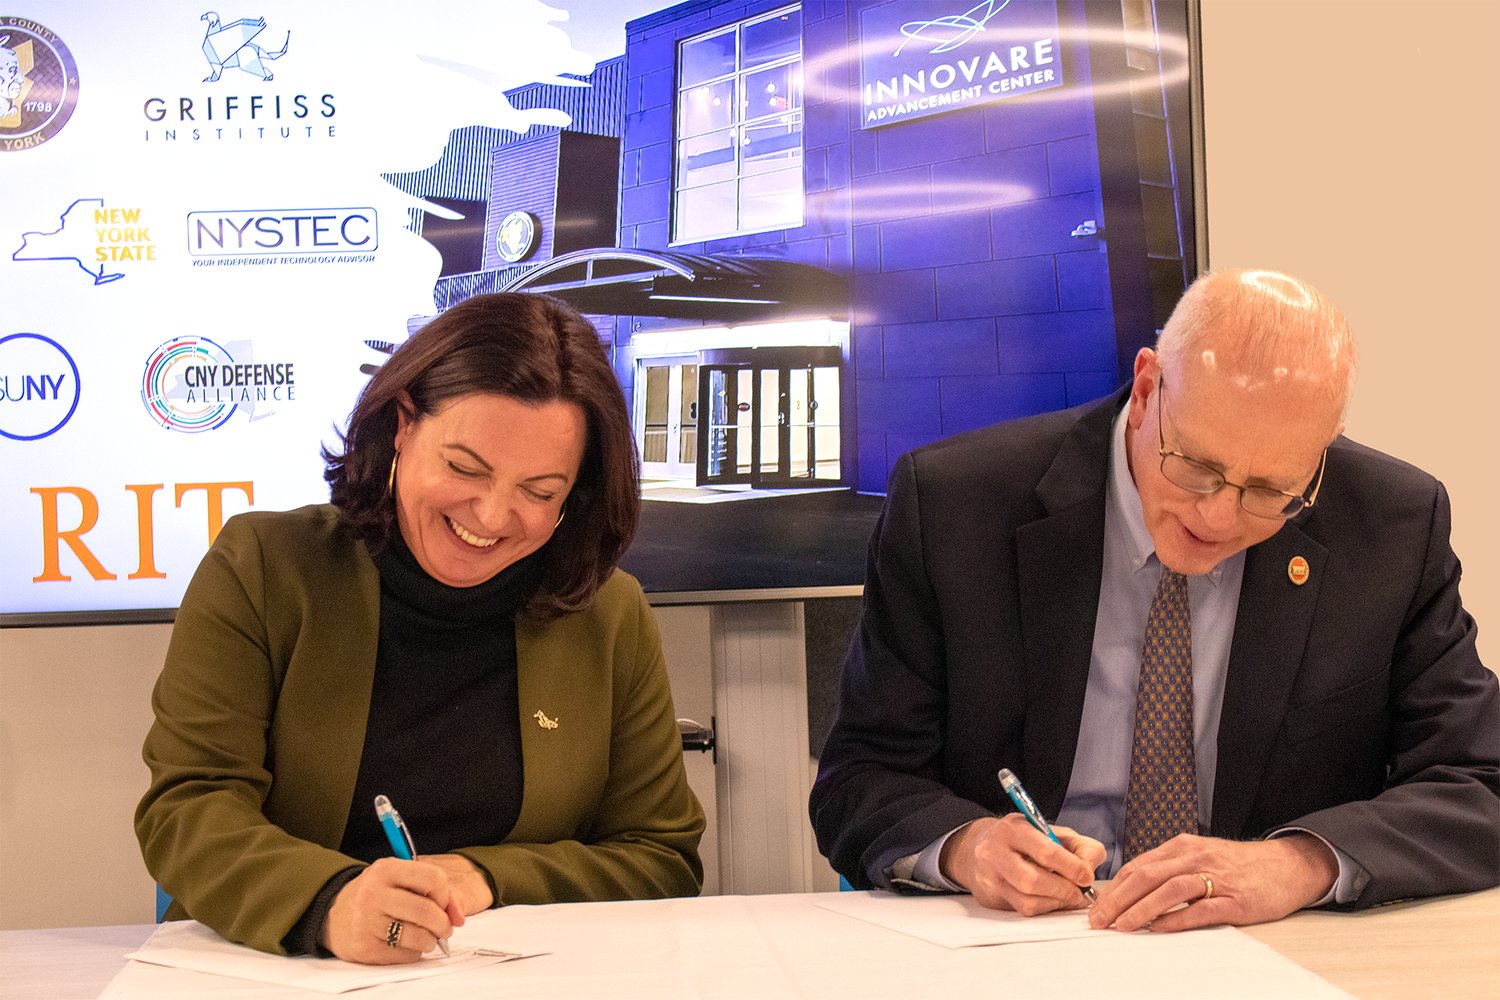 Heather Hage, president &amp; CEO of Griffiss Institute and David C. Munson Jr., president of the Rochester Institute of Technology, sign a memorandum of understanding at the Innovare Advancement Center on Tuesday.